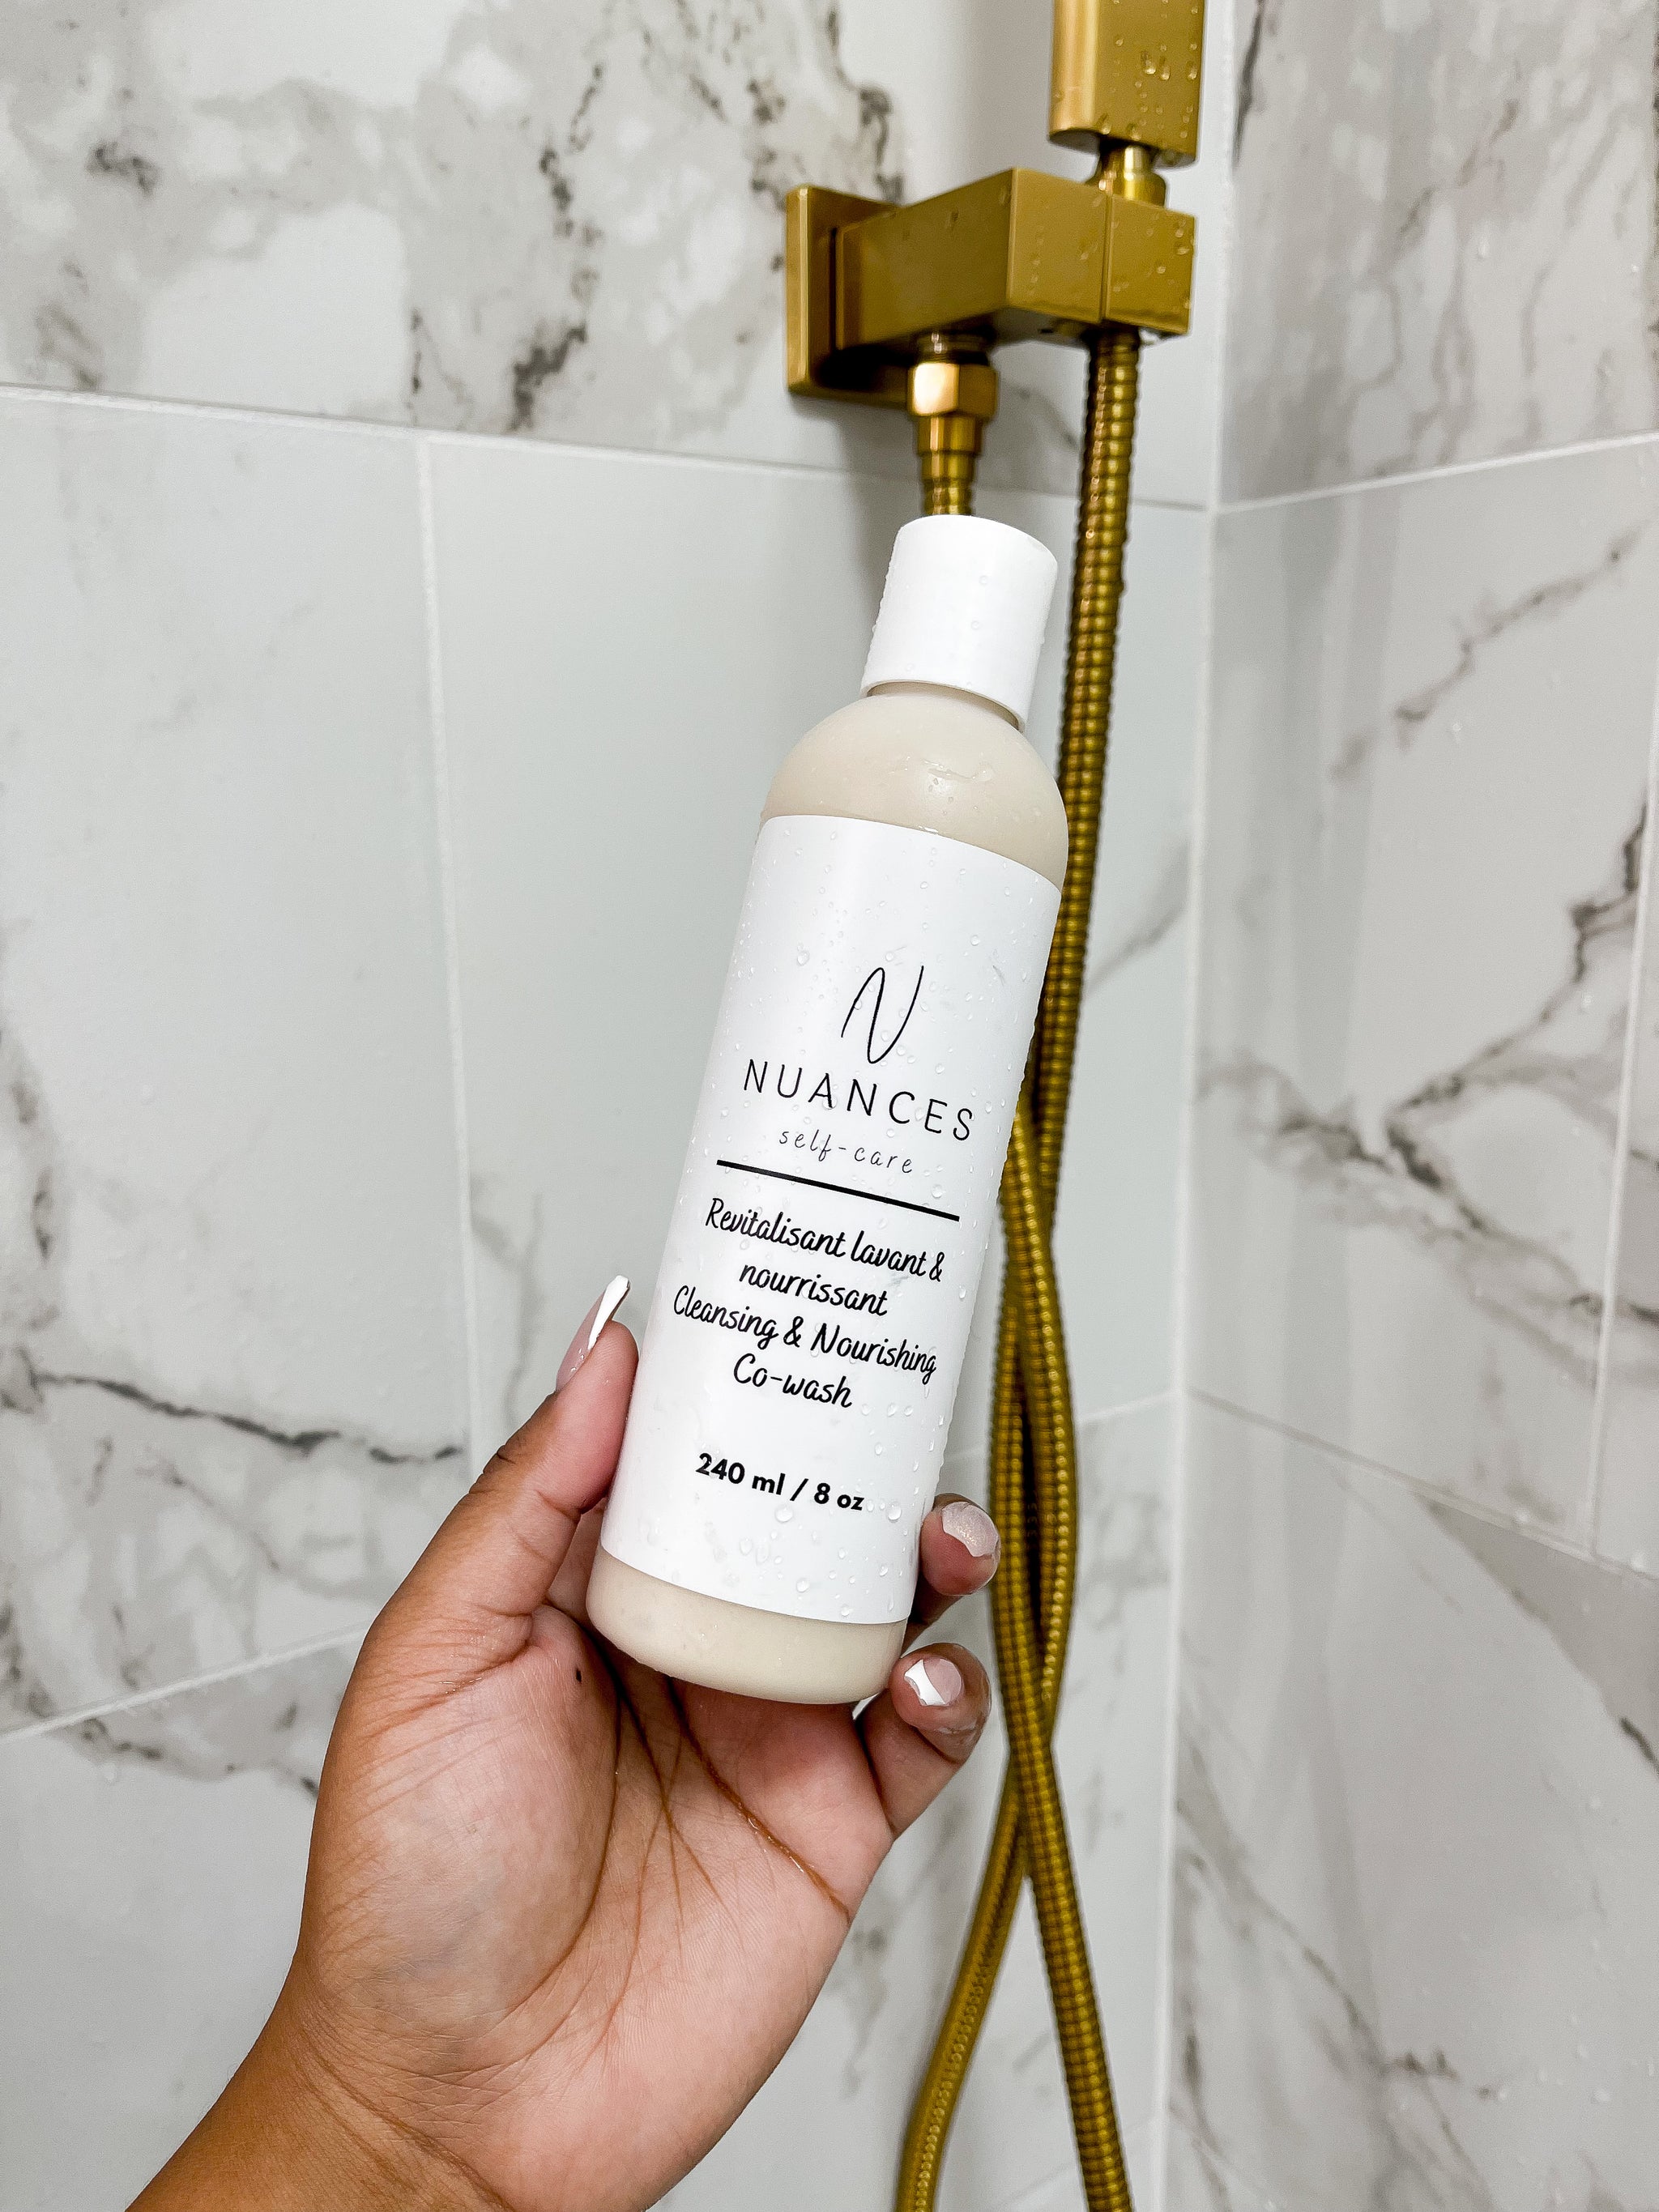 Nuances Self Care - Cleansing & Nourishing Co-wash